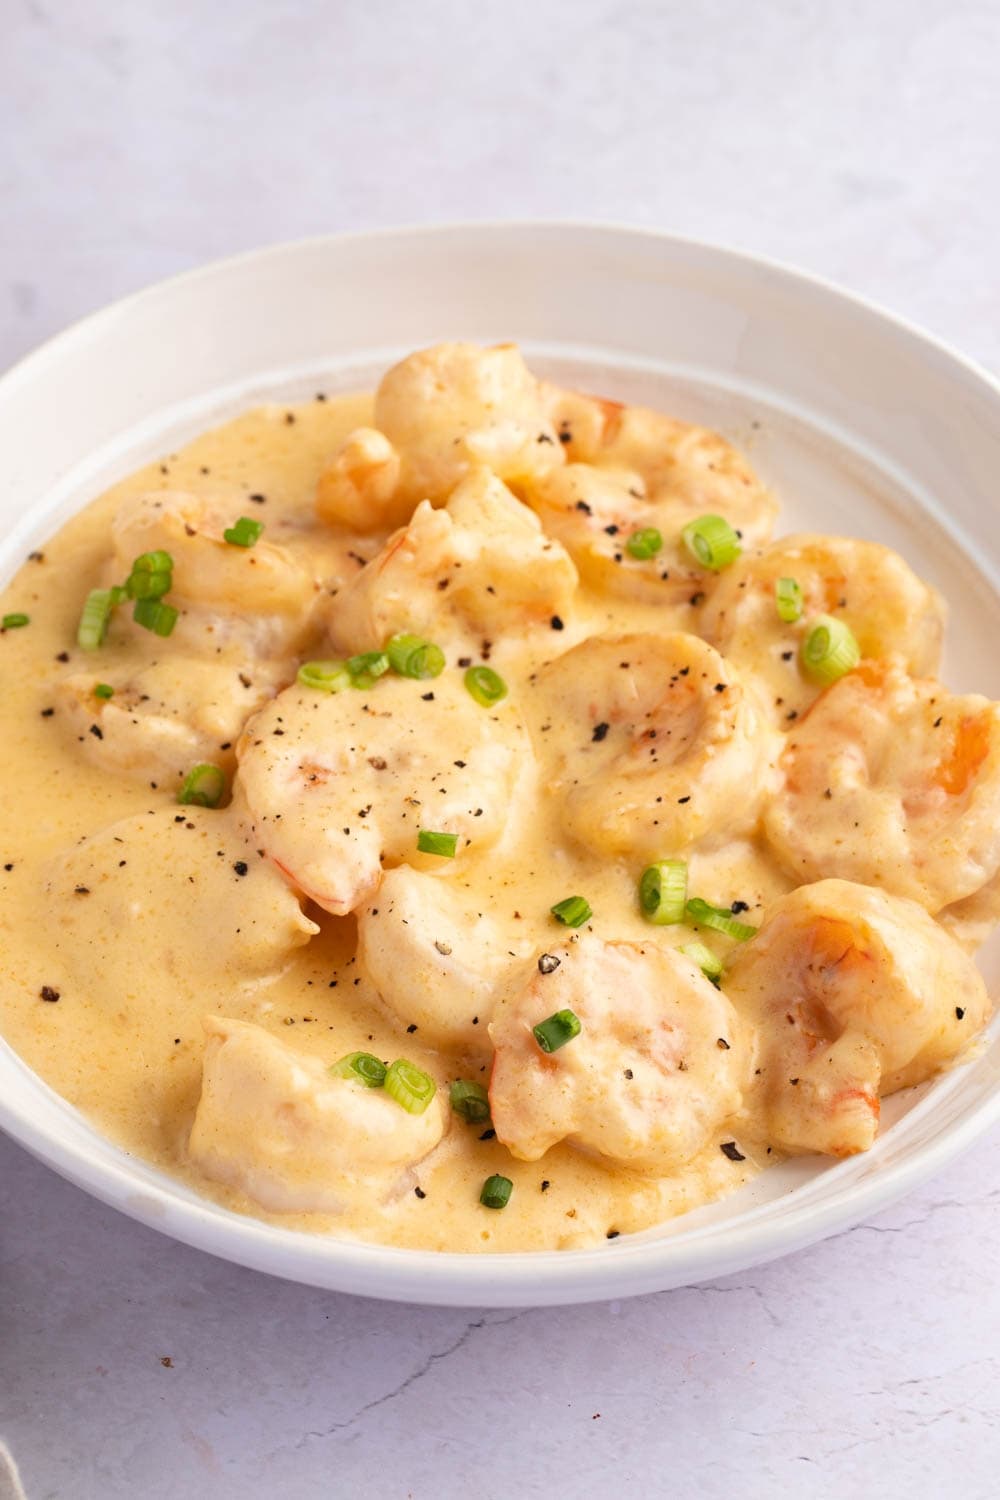 Creamy Shrimp Newburg in a White Bowl, Garnished With Sliced Onions and Black Pepper